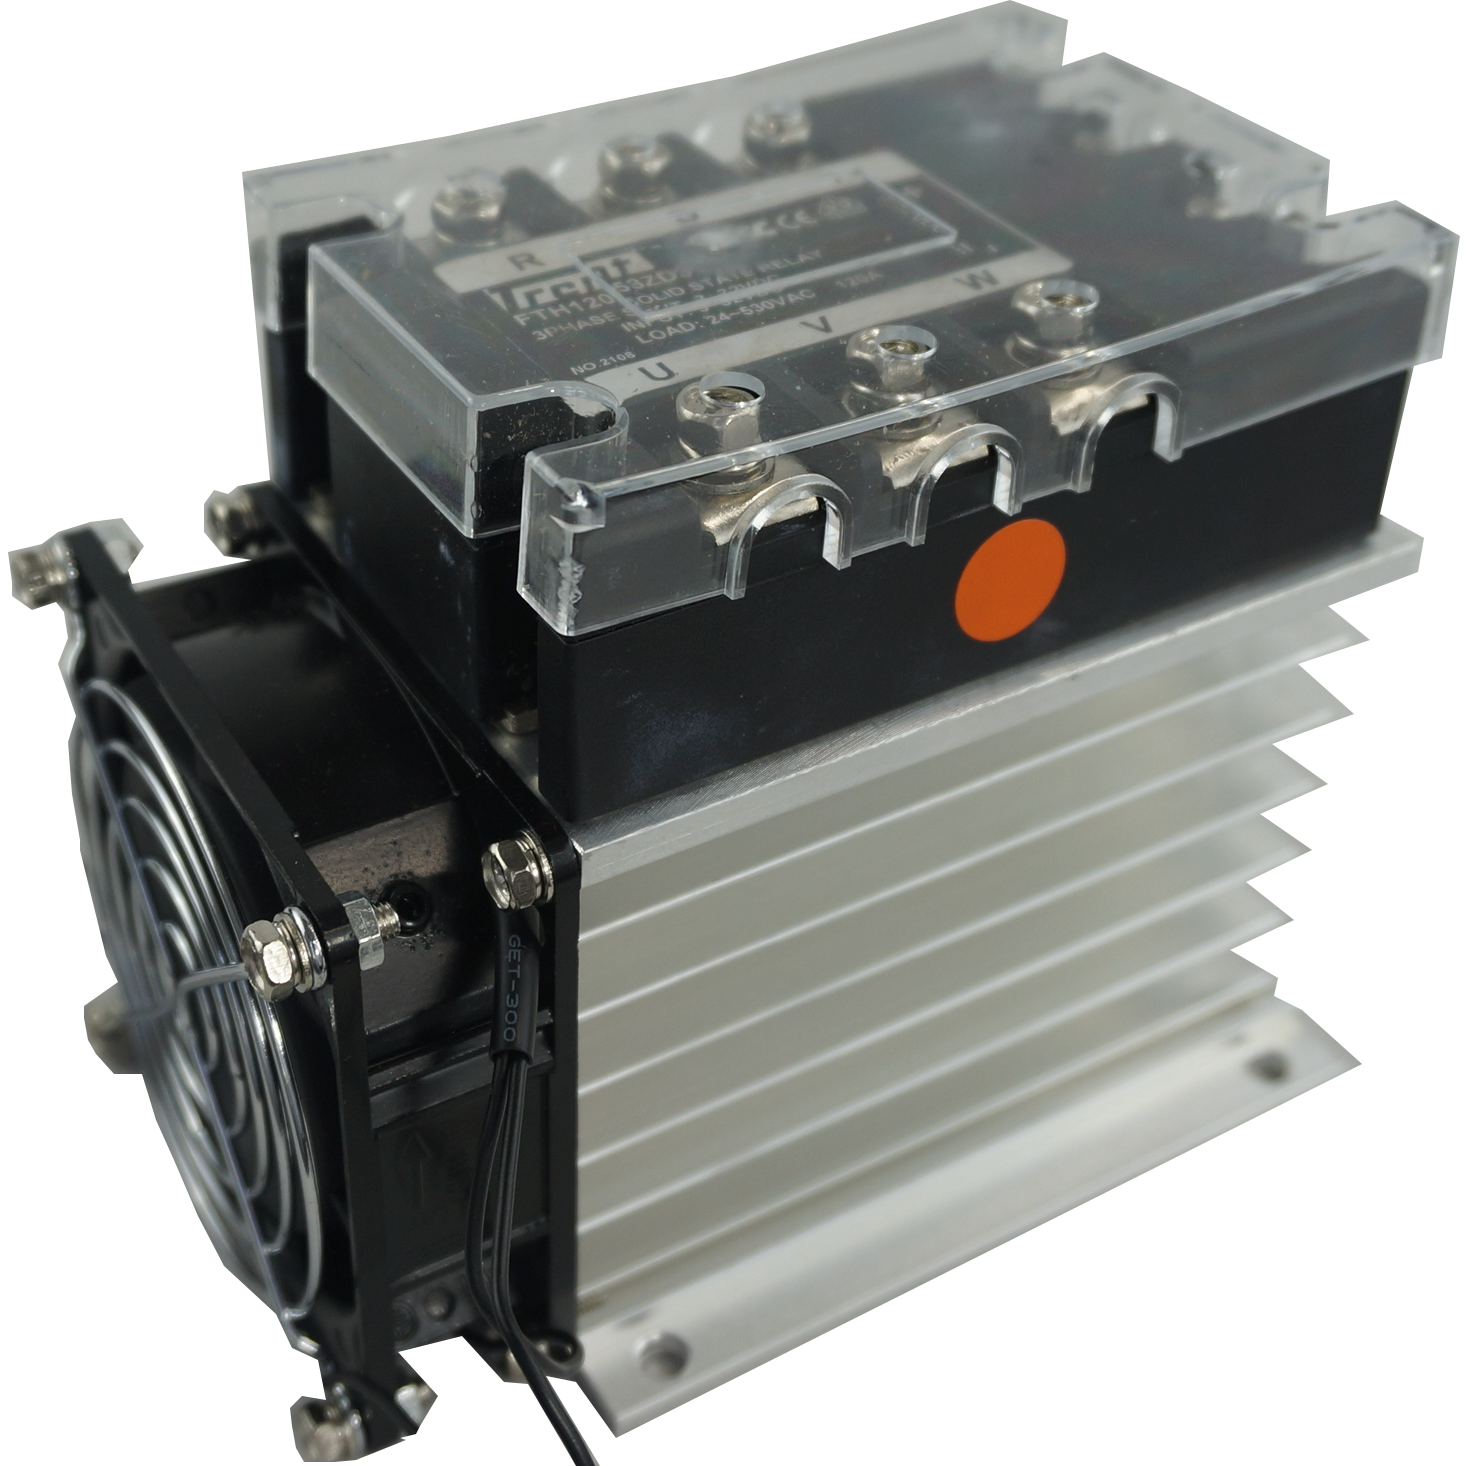 FTH12053ZA4 + HS212F, Solid State Relay, and Heatsink Assembly, 3 Phase 90-280VAC Control, 36 Amp per phase @ 40 Deg C, 48-530VAC Load, LED Status Indicator, with IP20 Cover